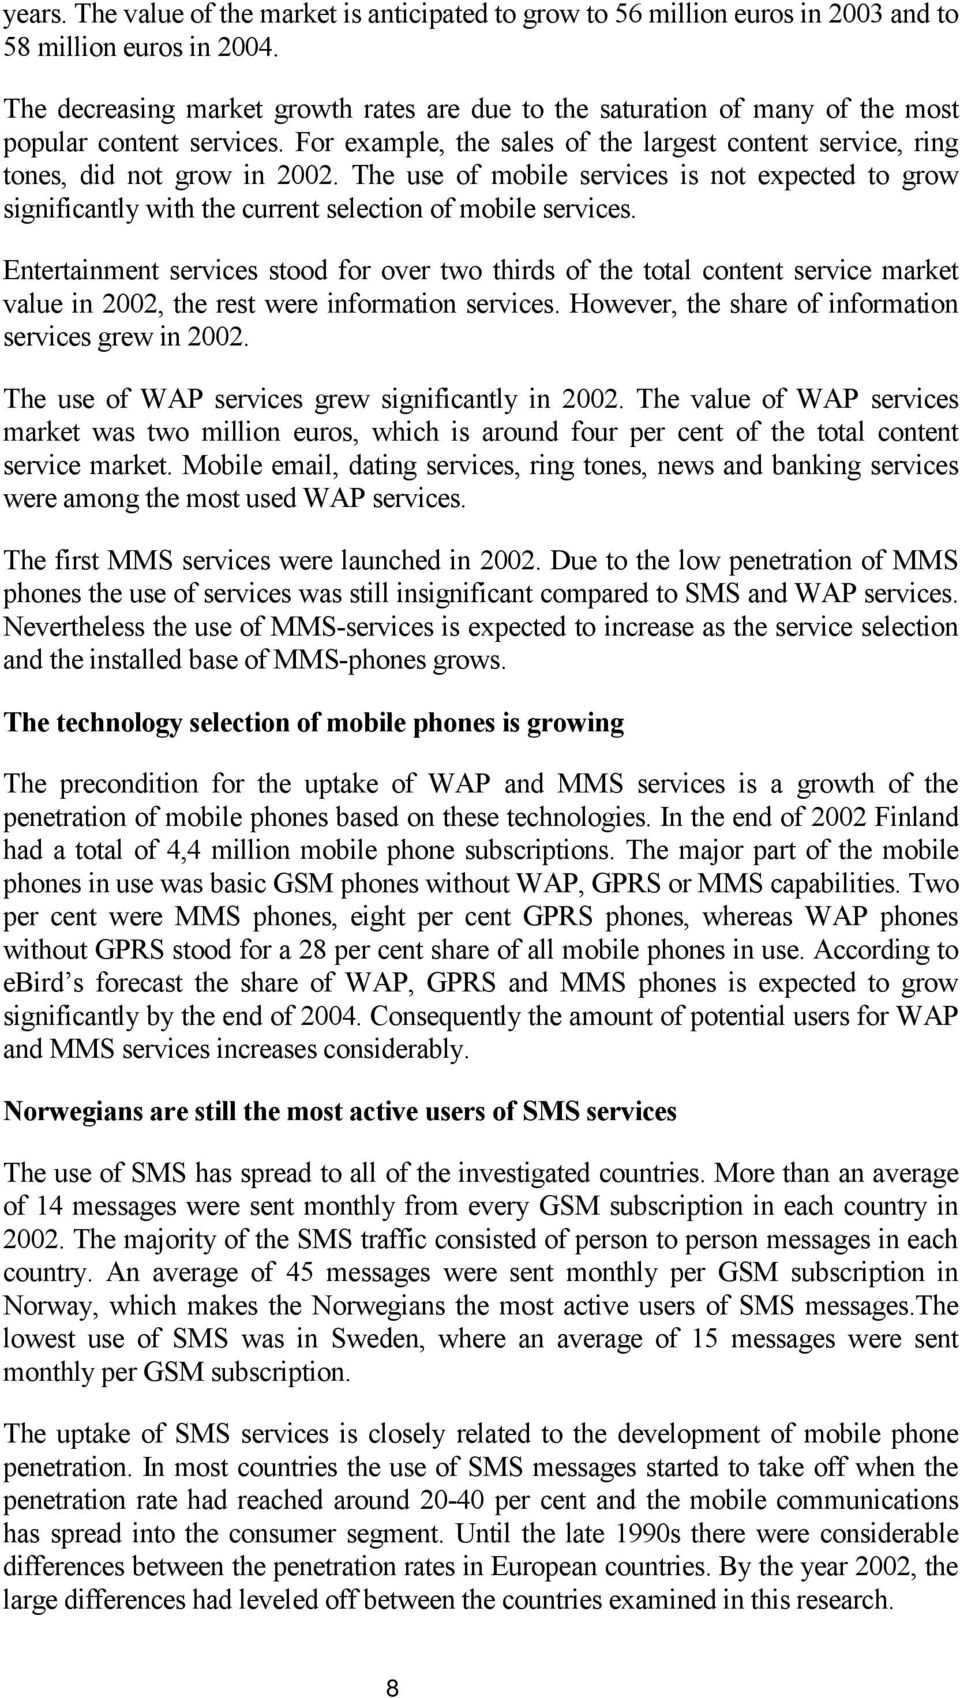 The use of mobile services is not expected to grow significantly with the current selection of mobile services.